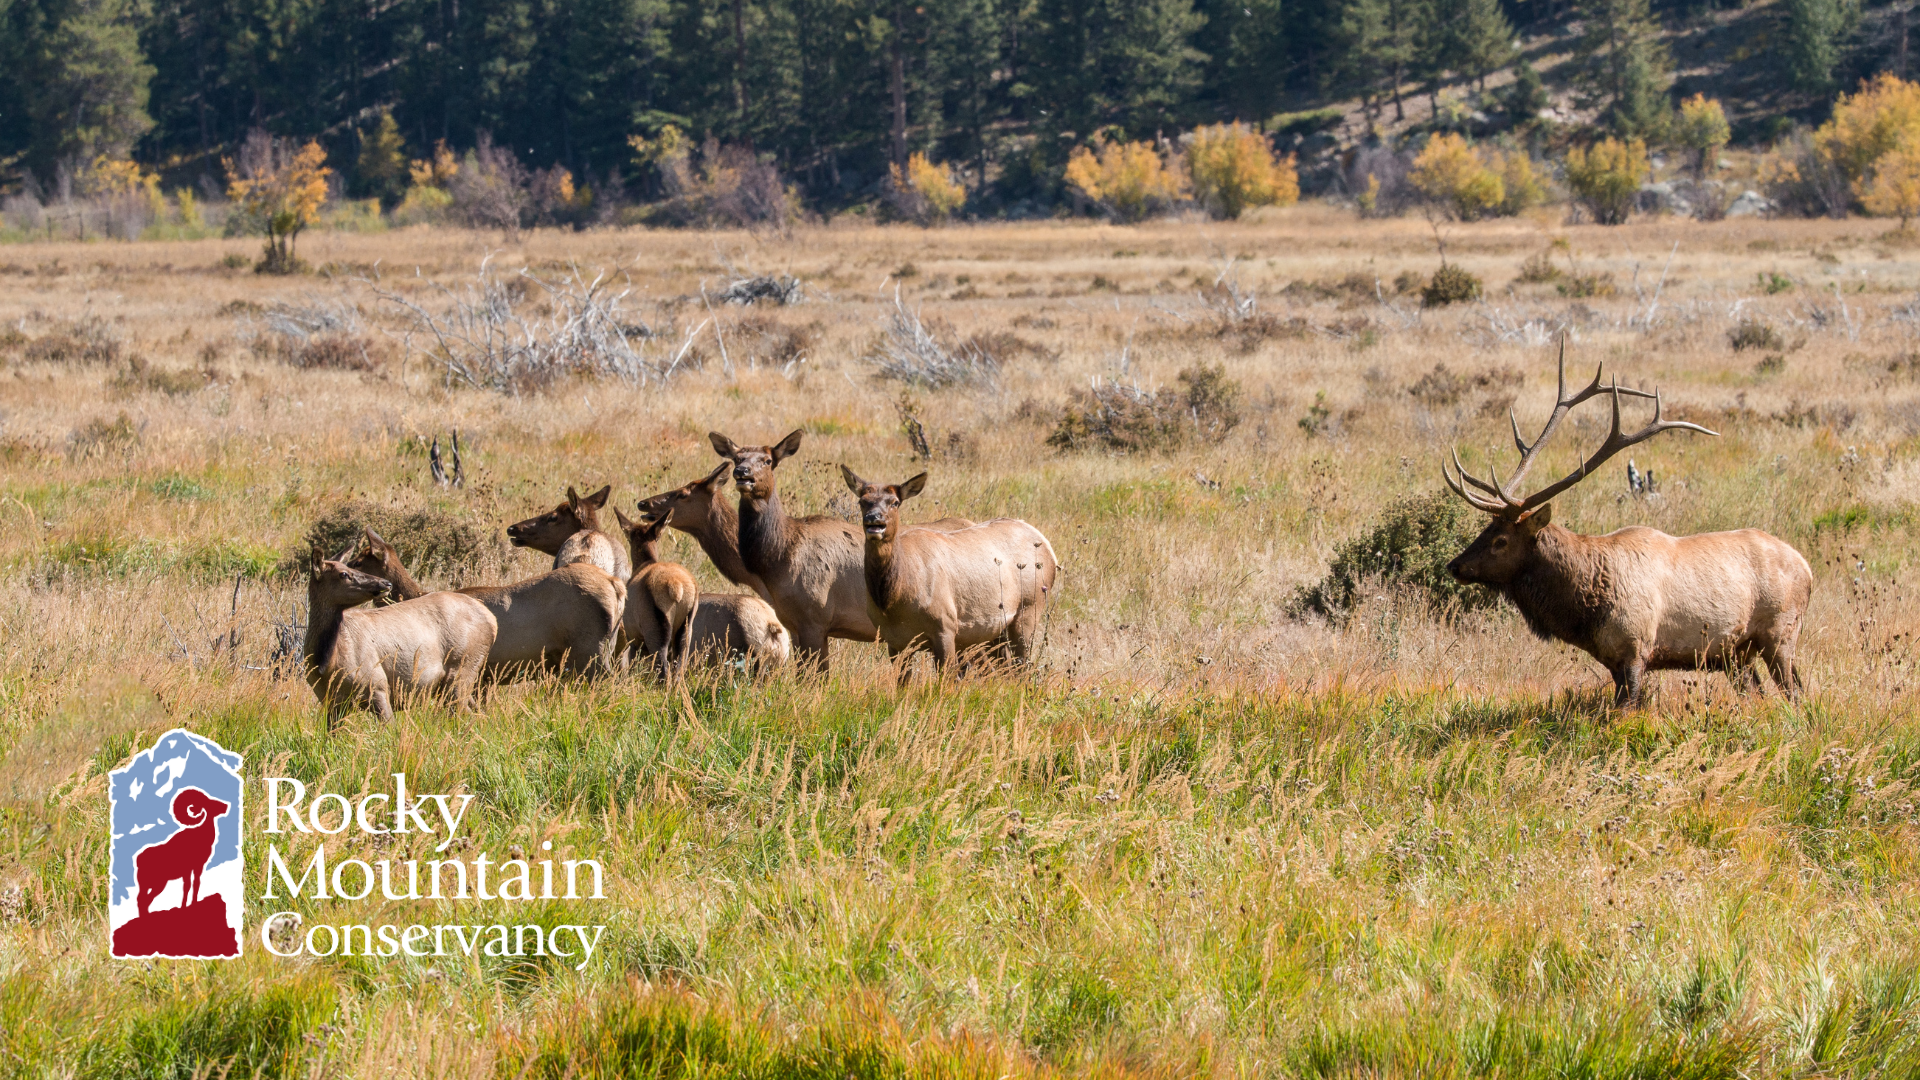 A group of elk, including a large bull with antlers, stand in a grassy meadow during autumn. The Rocky Mountain Conservancy logo is in the lower-left corner.